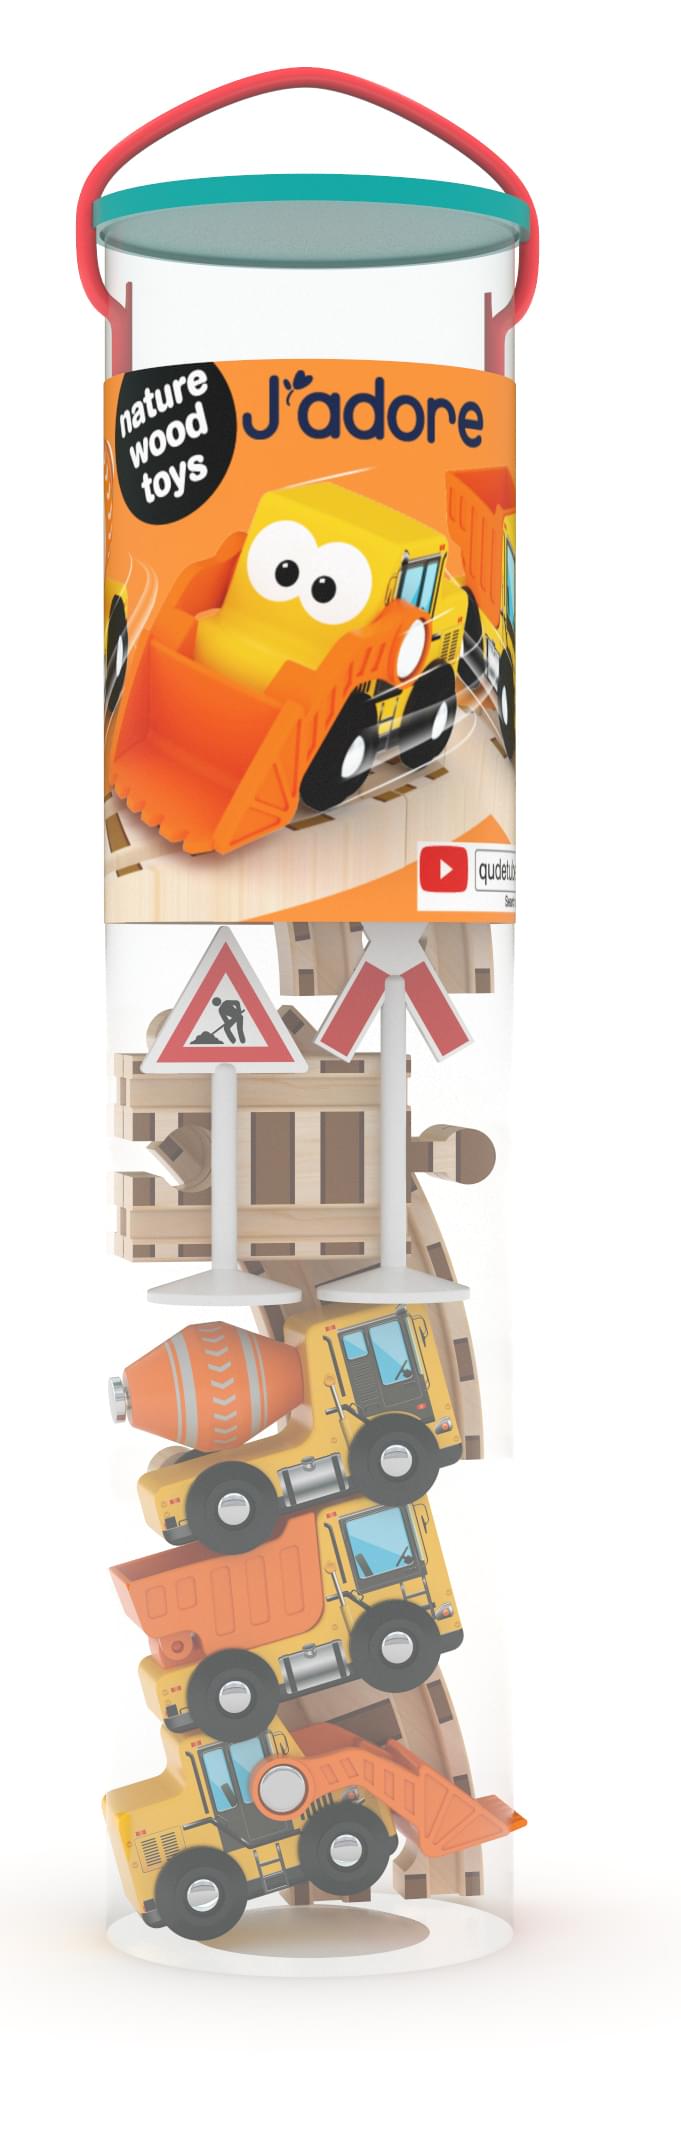 J'adore Construction Train and Rail Wooden Toy Playset